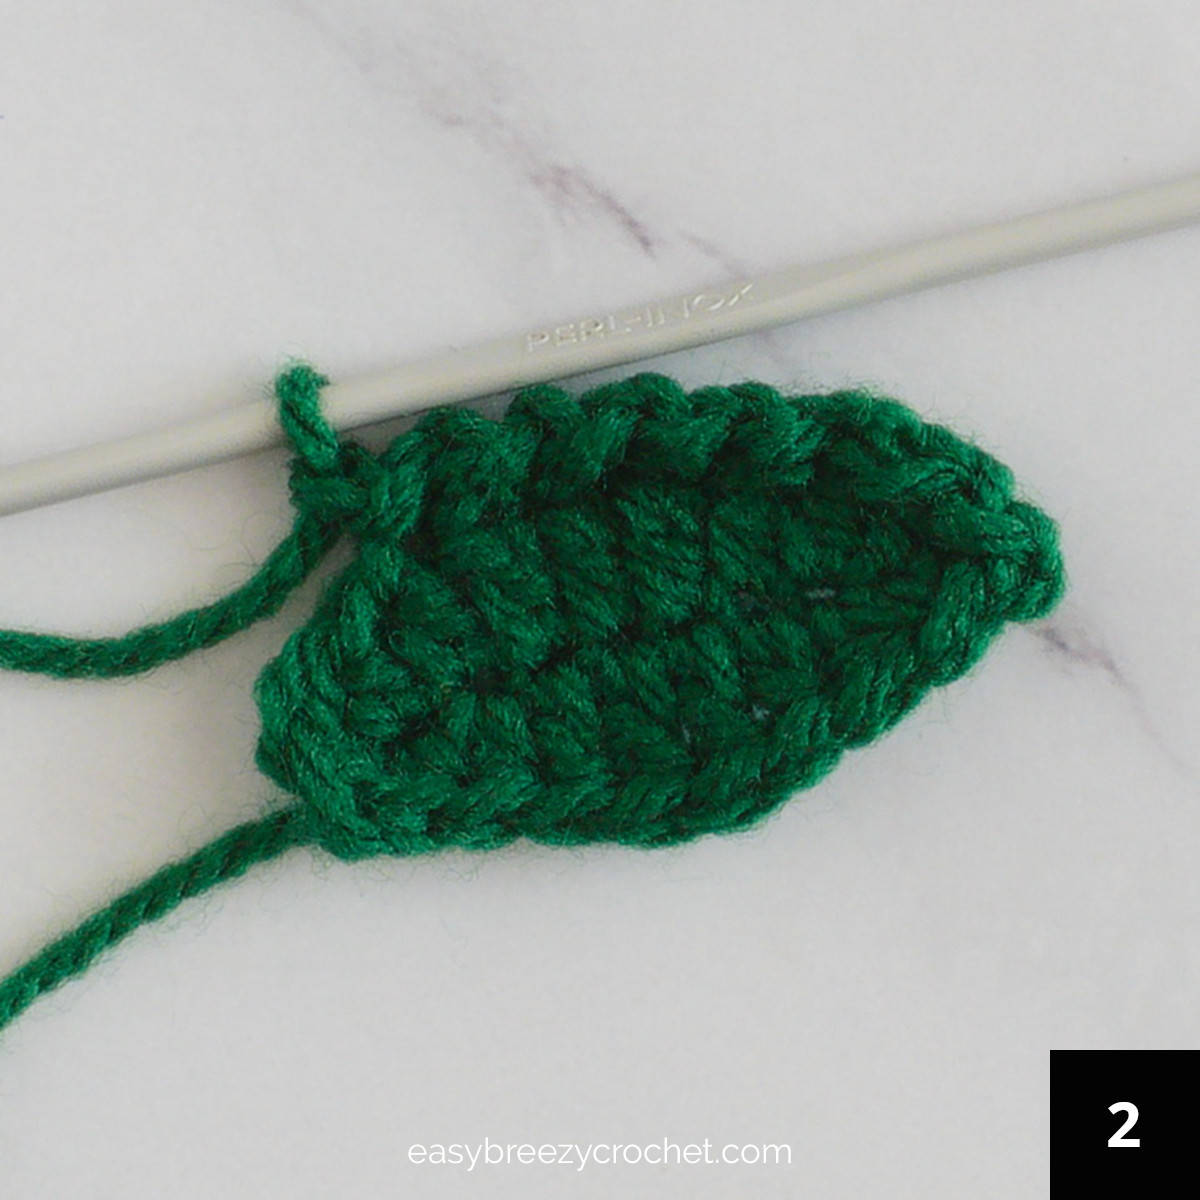 Image showing edging on a crocheted leaf.